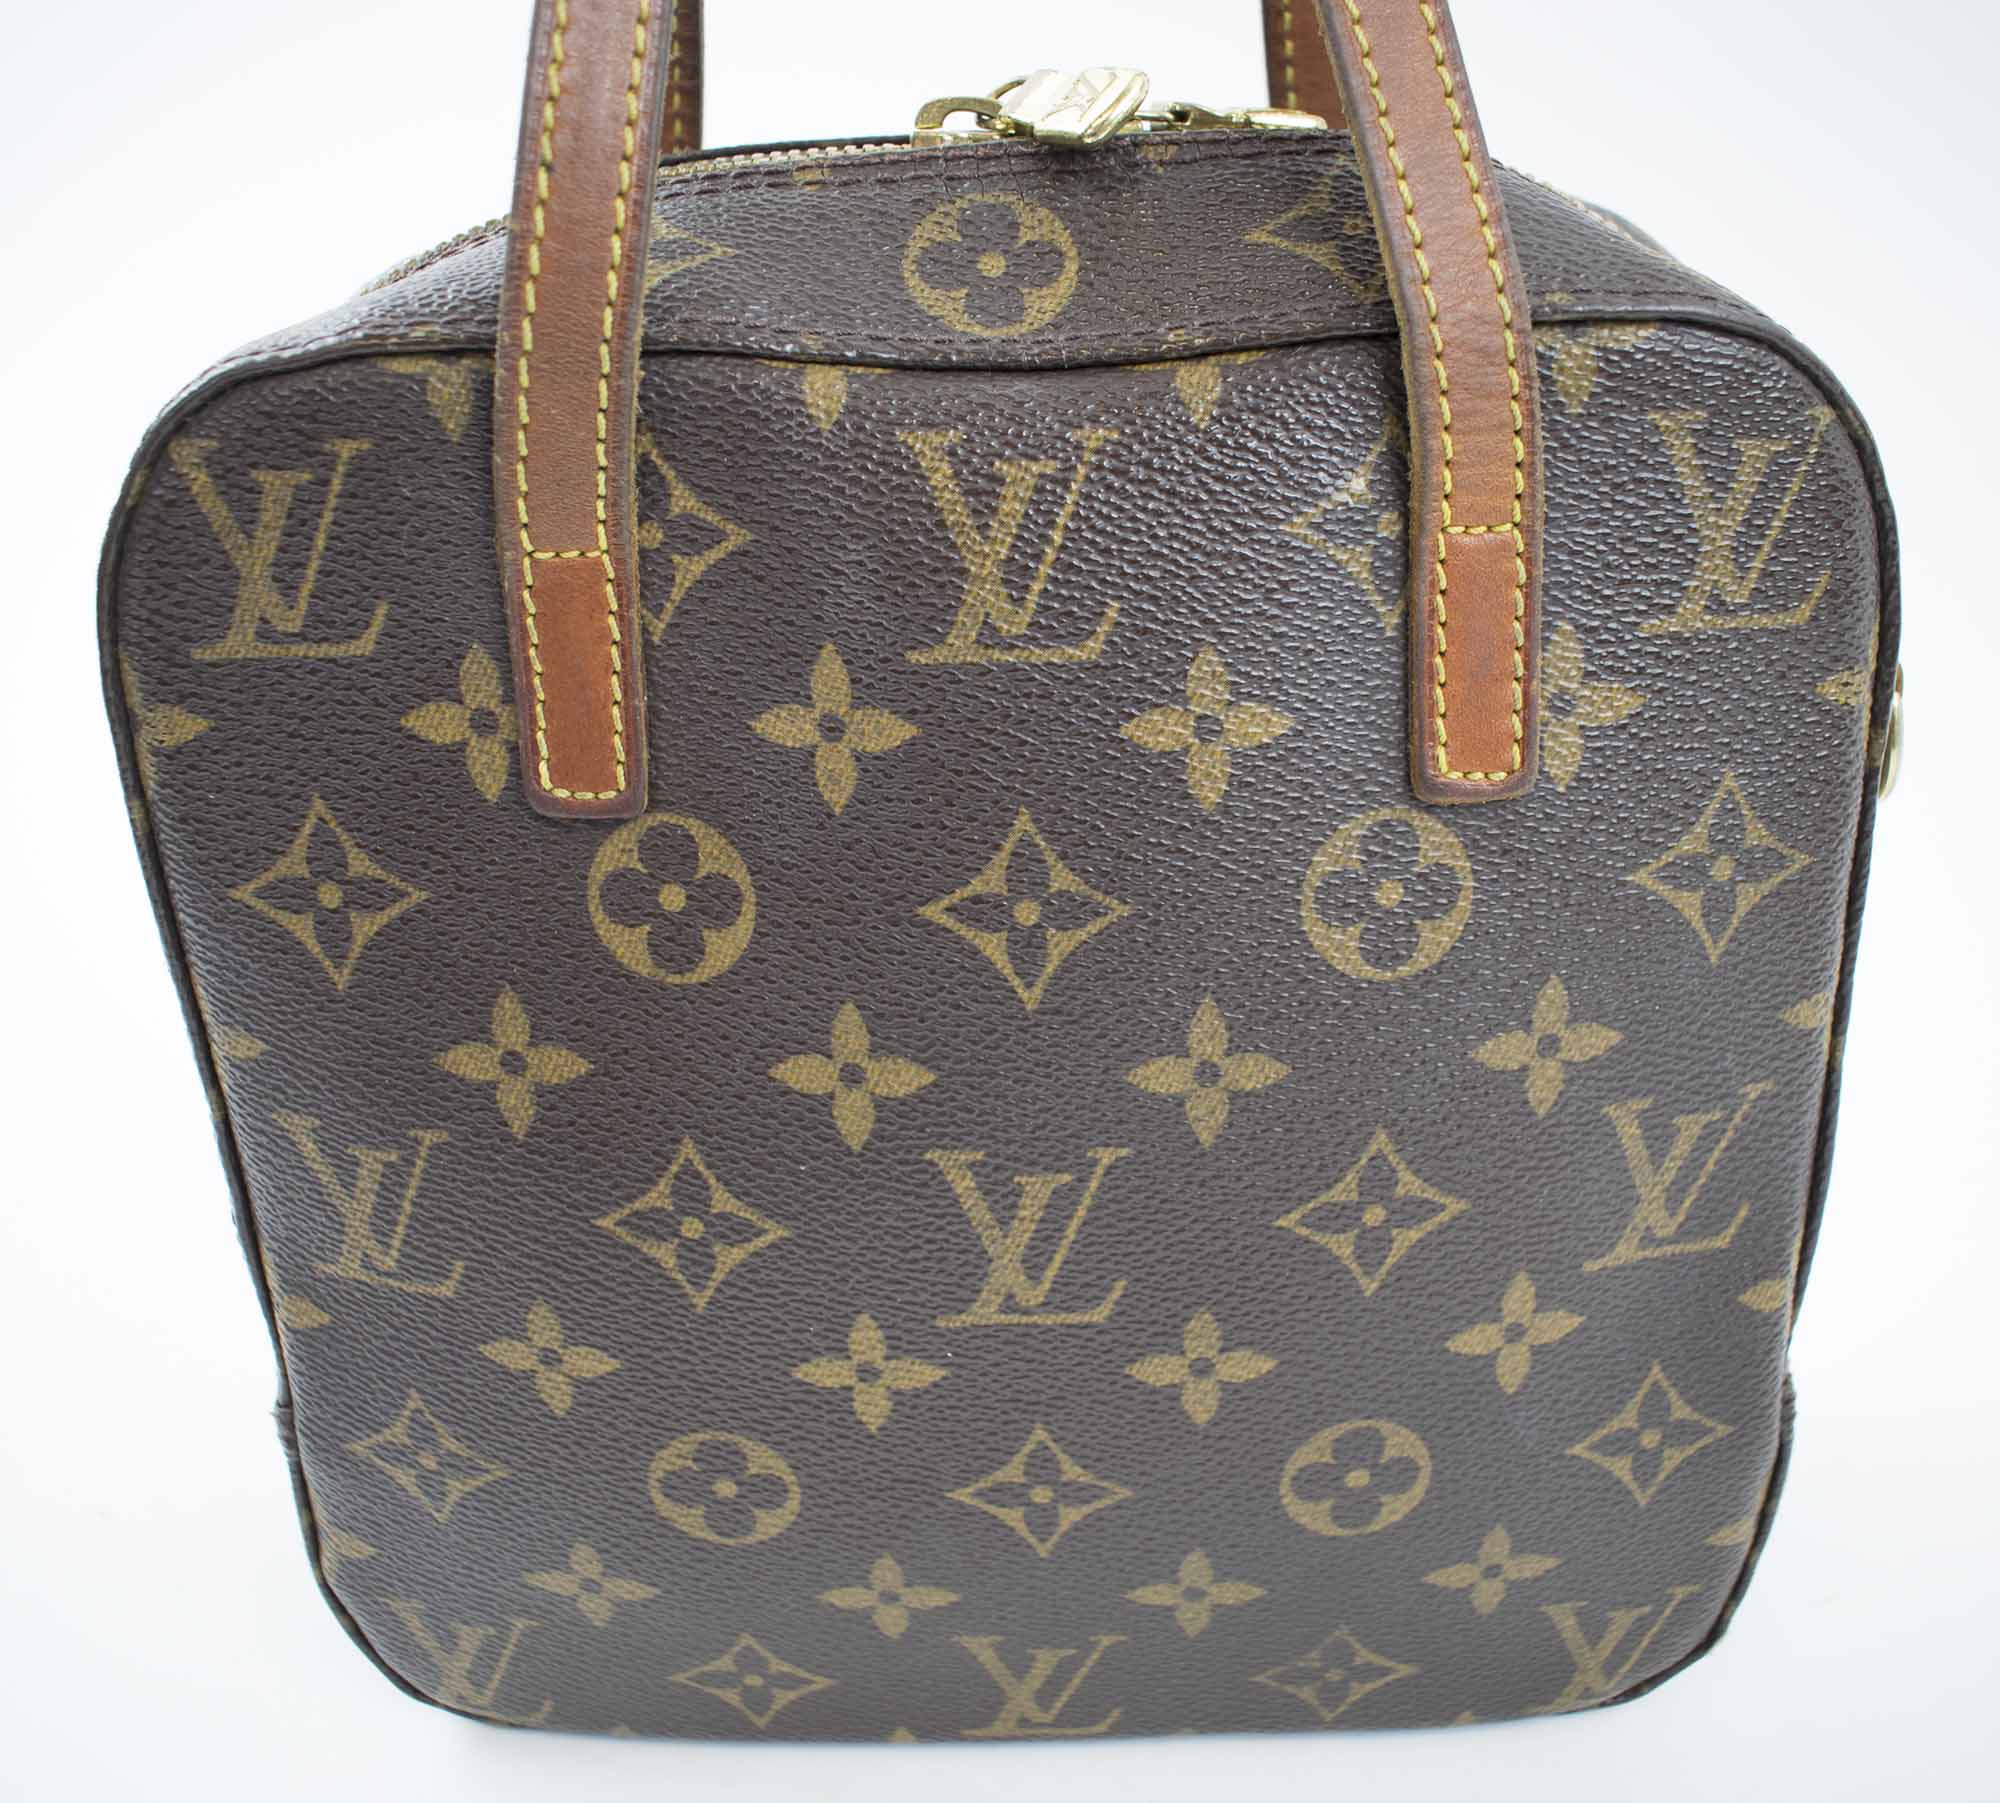 LOUIS VUITTON HANDBAG, monogram pattern with leather trims and two top ...